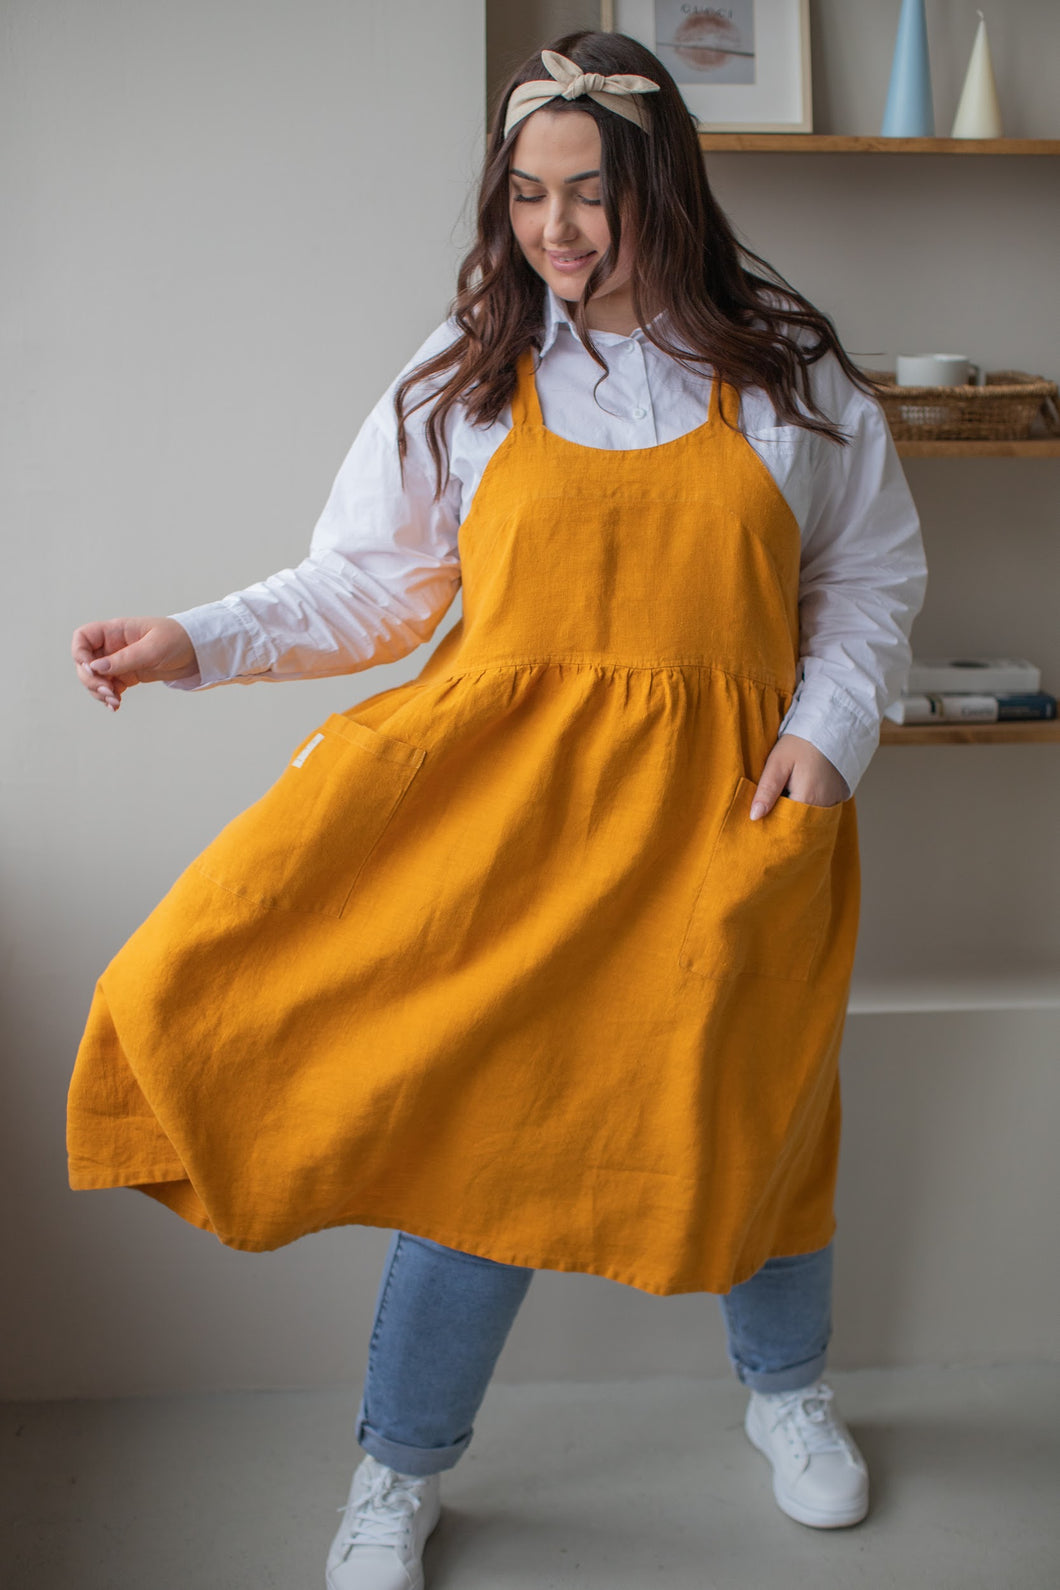 100% Linen French Apron in Mustard Yellow